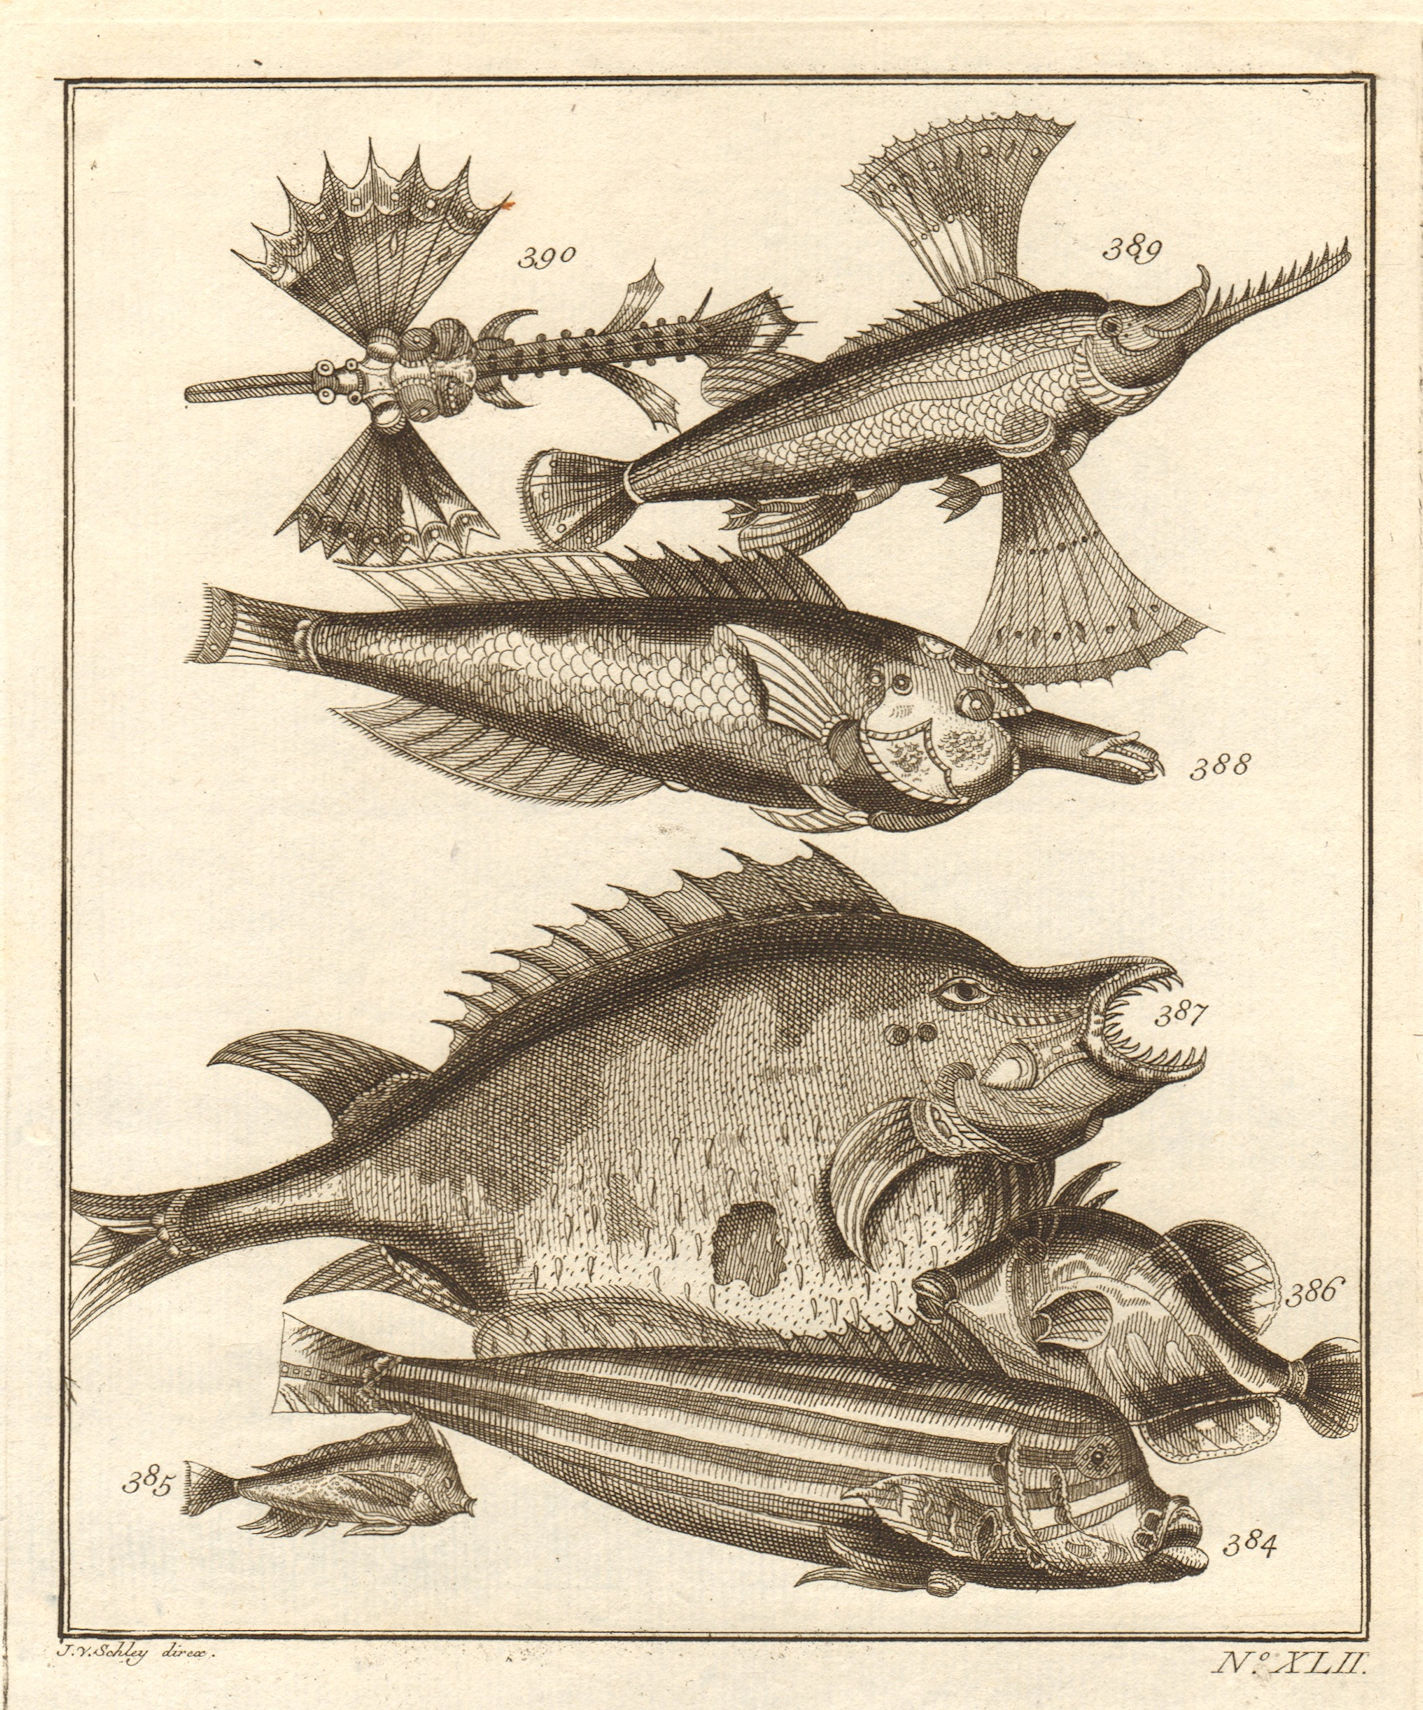 Associate Product XLII. Poissons d'Ambione. Indonesia Moluccas Maluku tropical fish. SCHLEY 1763